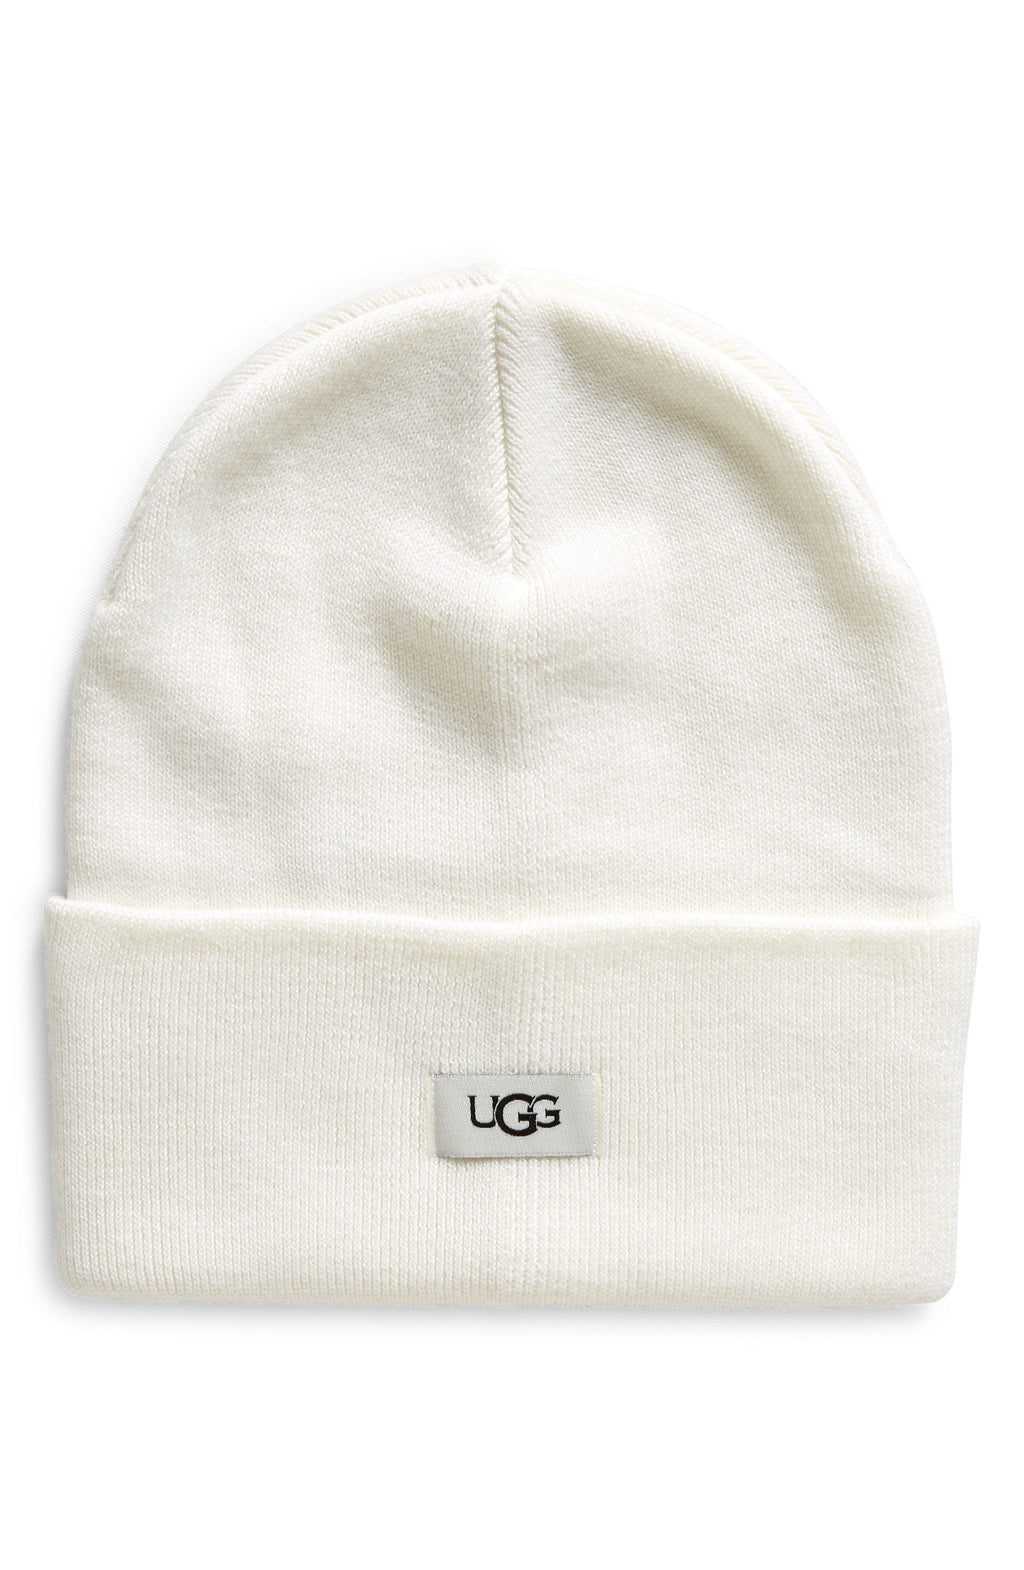 UGG<sup>®</sup> Knit Cuff Beanie Hat, Main, color, IVORY